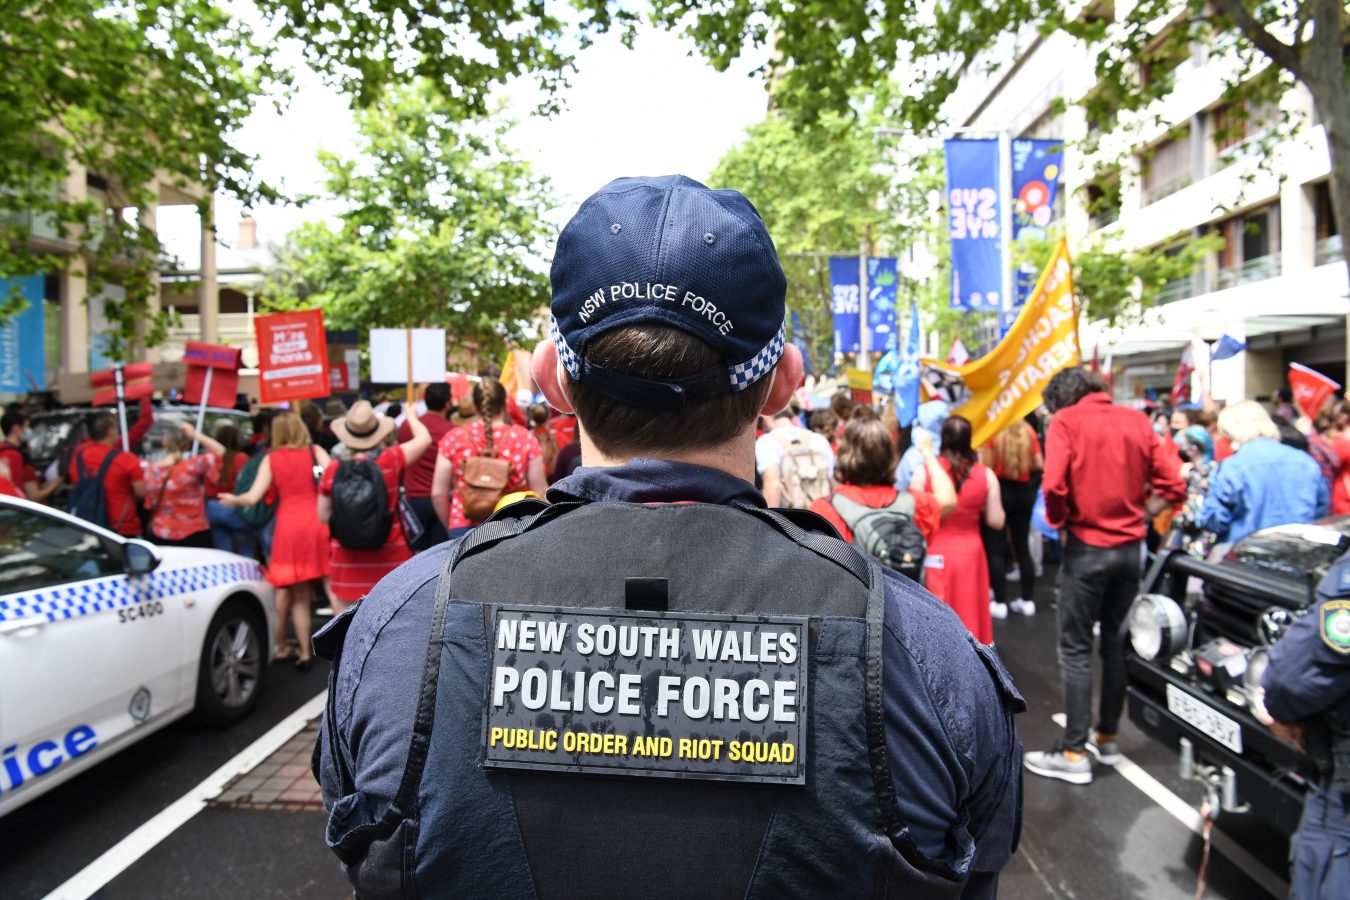 NSW Police Riot Officer stands behind a crowd of protester dressed in red and with banners